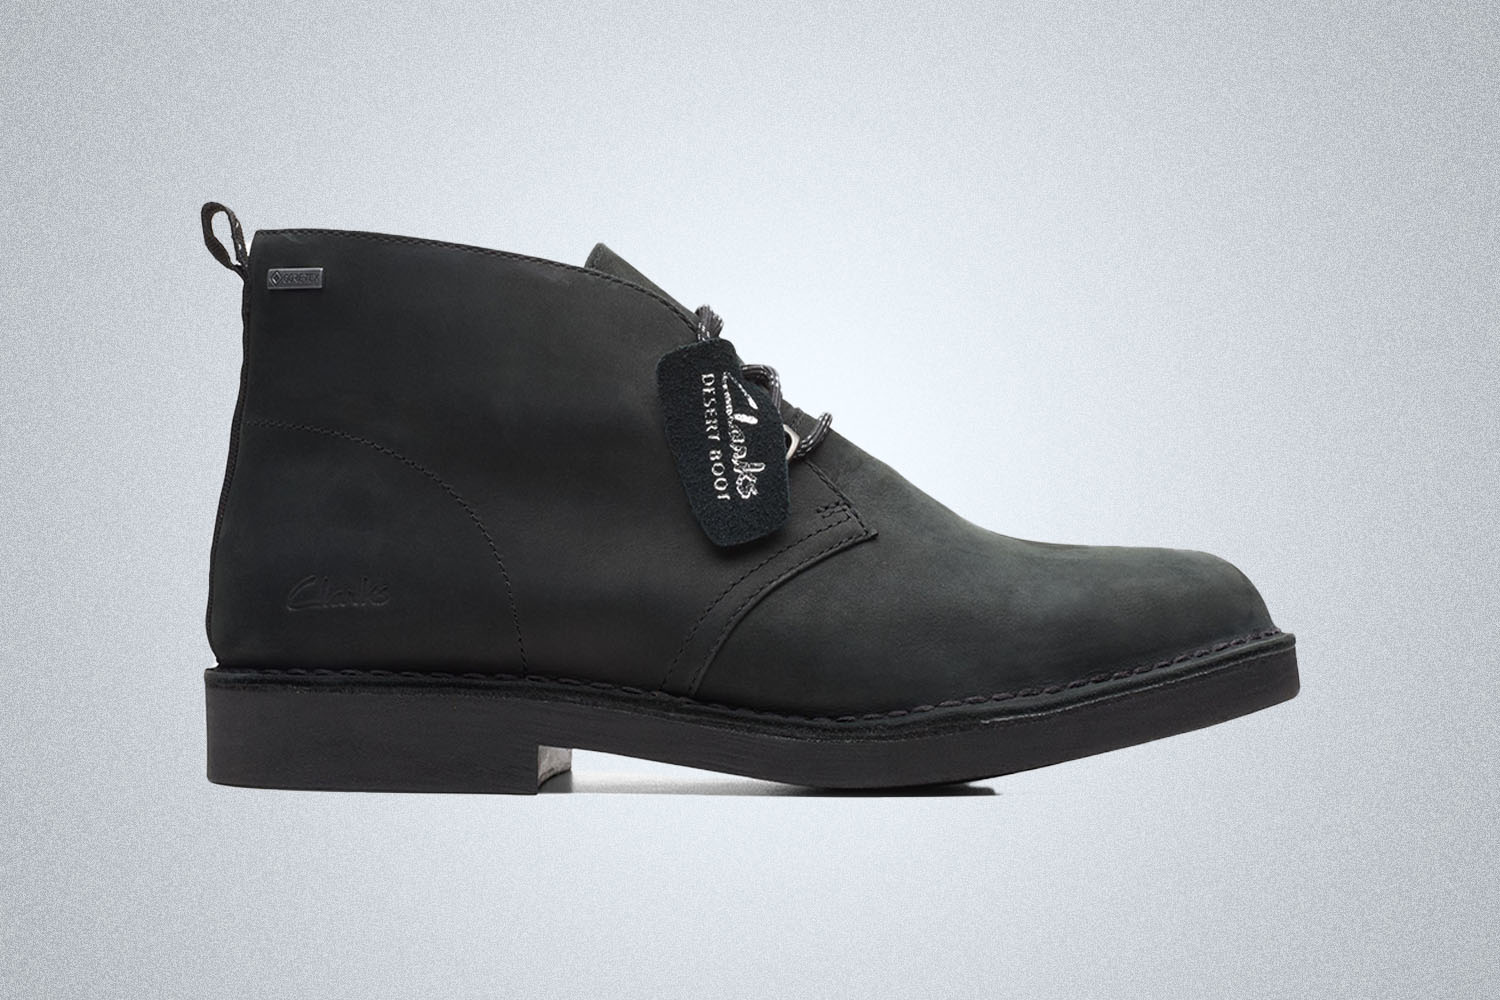 a black Clarks boot